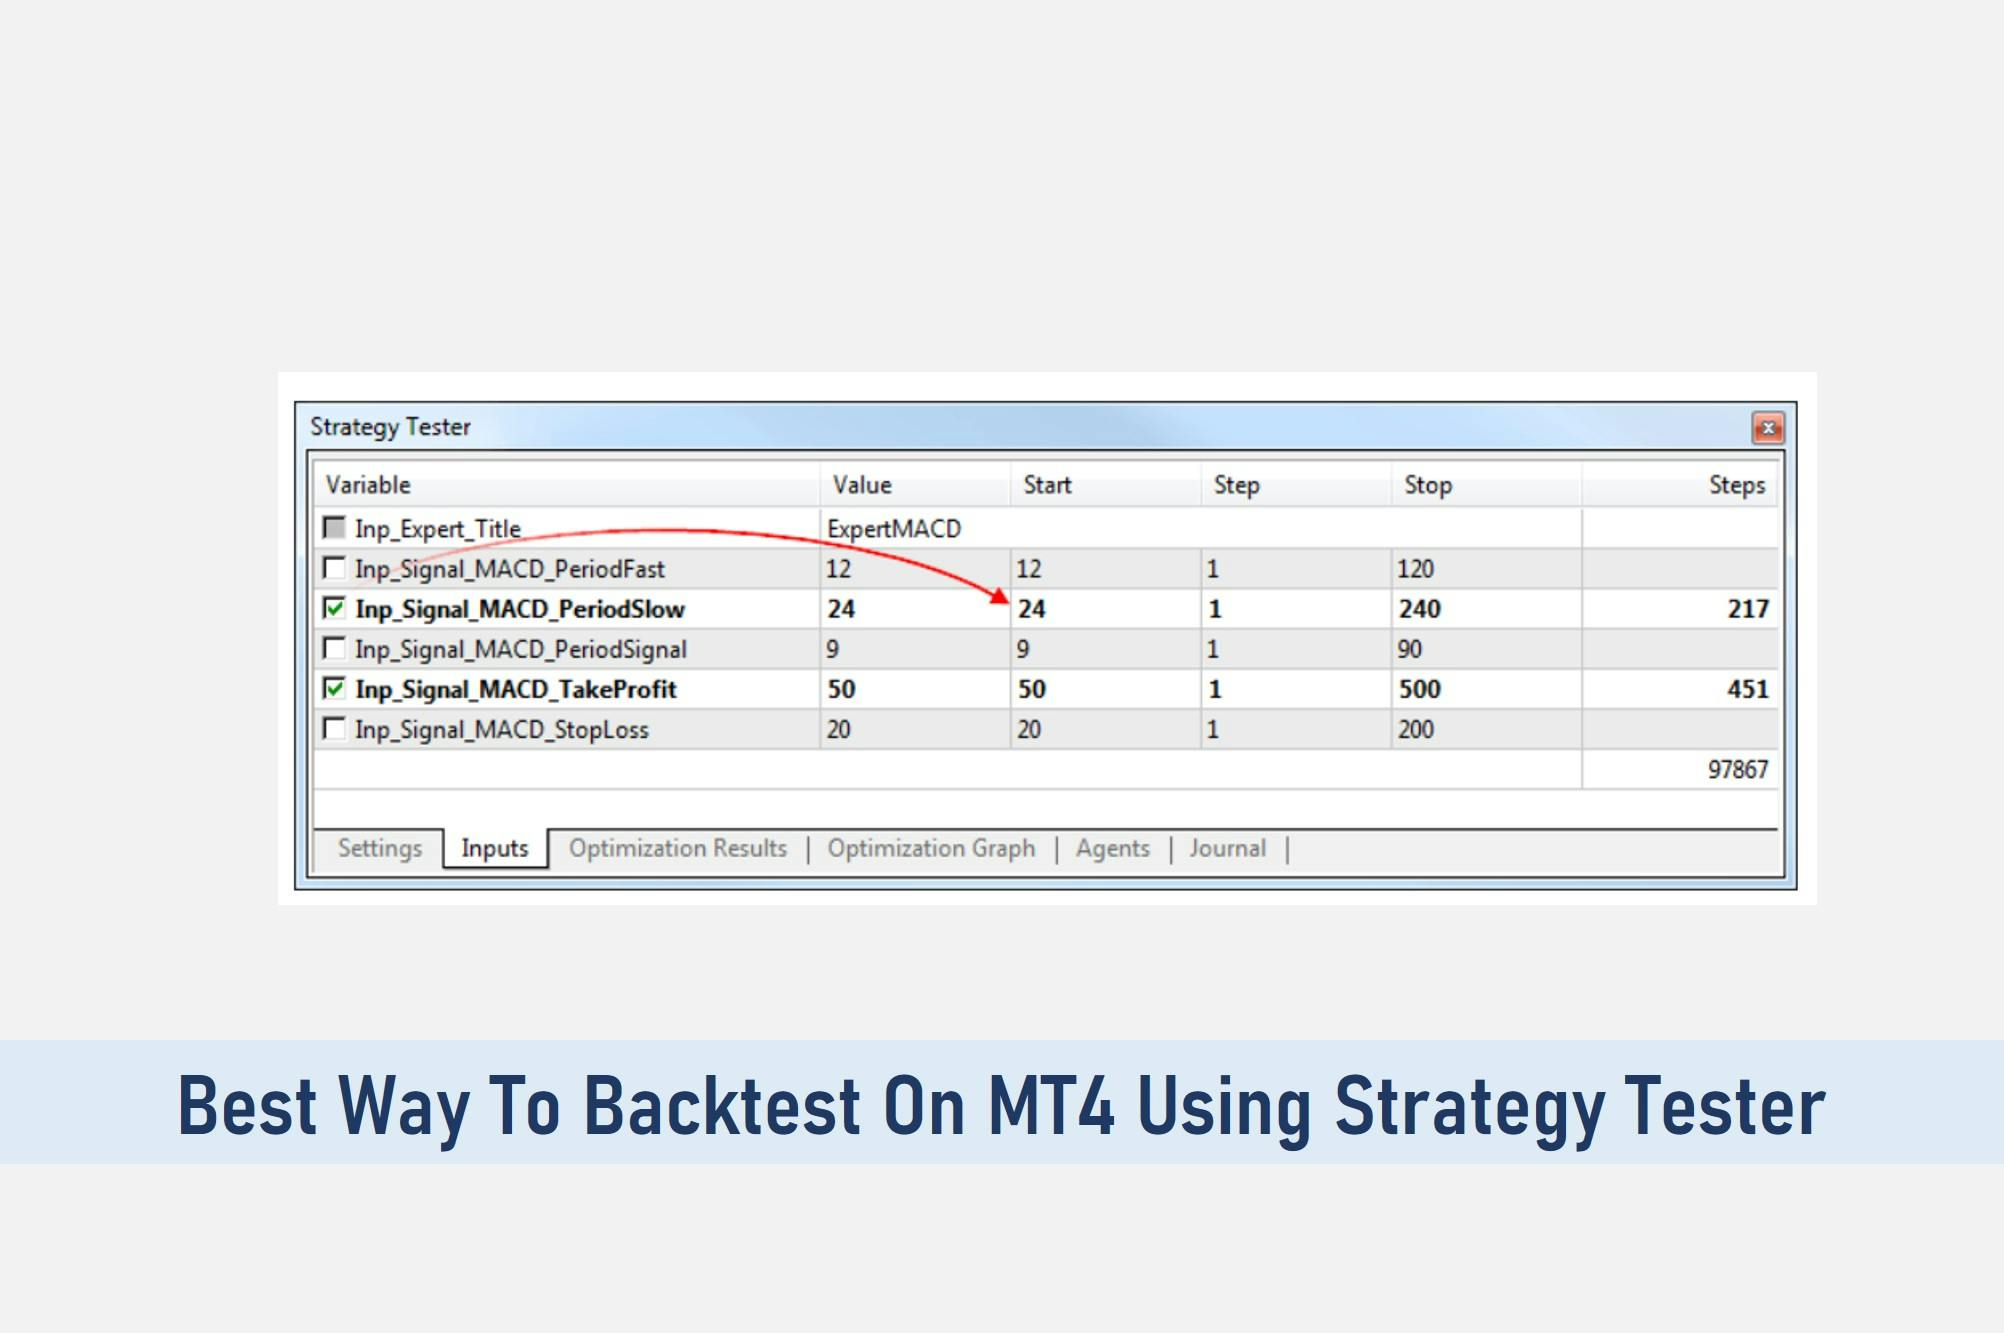 Best Way To Backtest On MT4 Using Strategy Tester